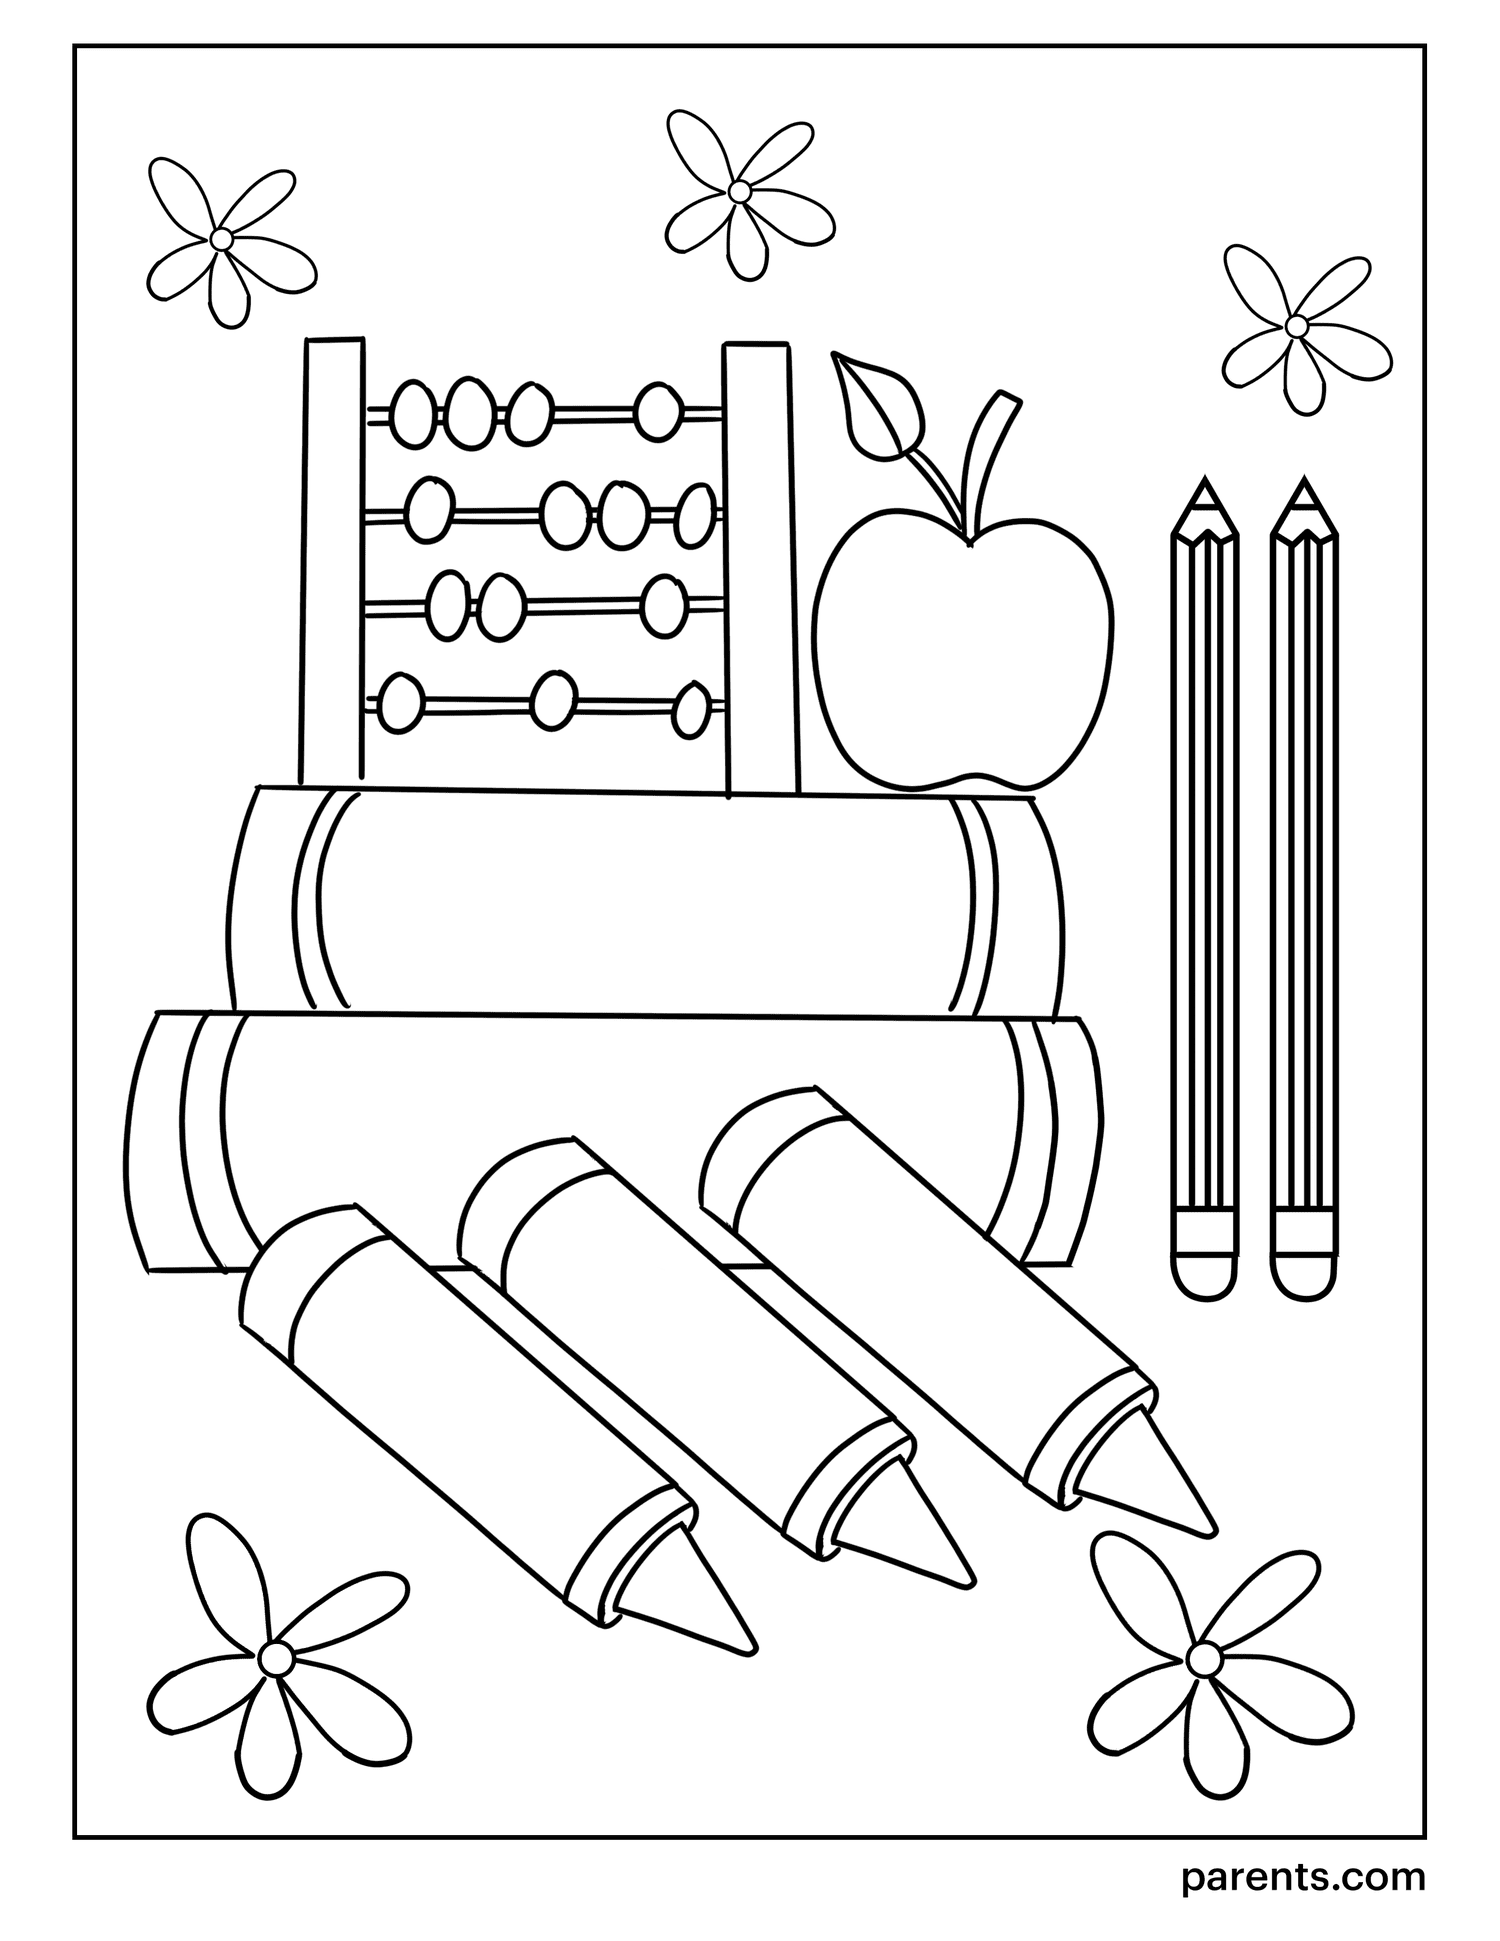 10 Printable Back to School Coloring Pages for Kids